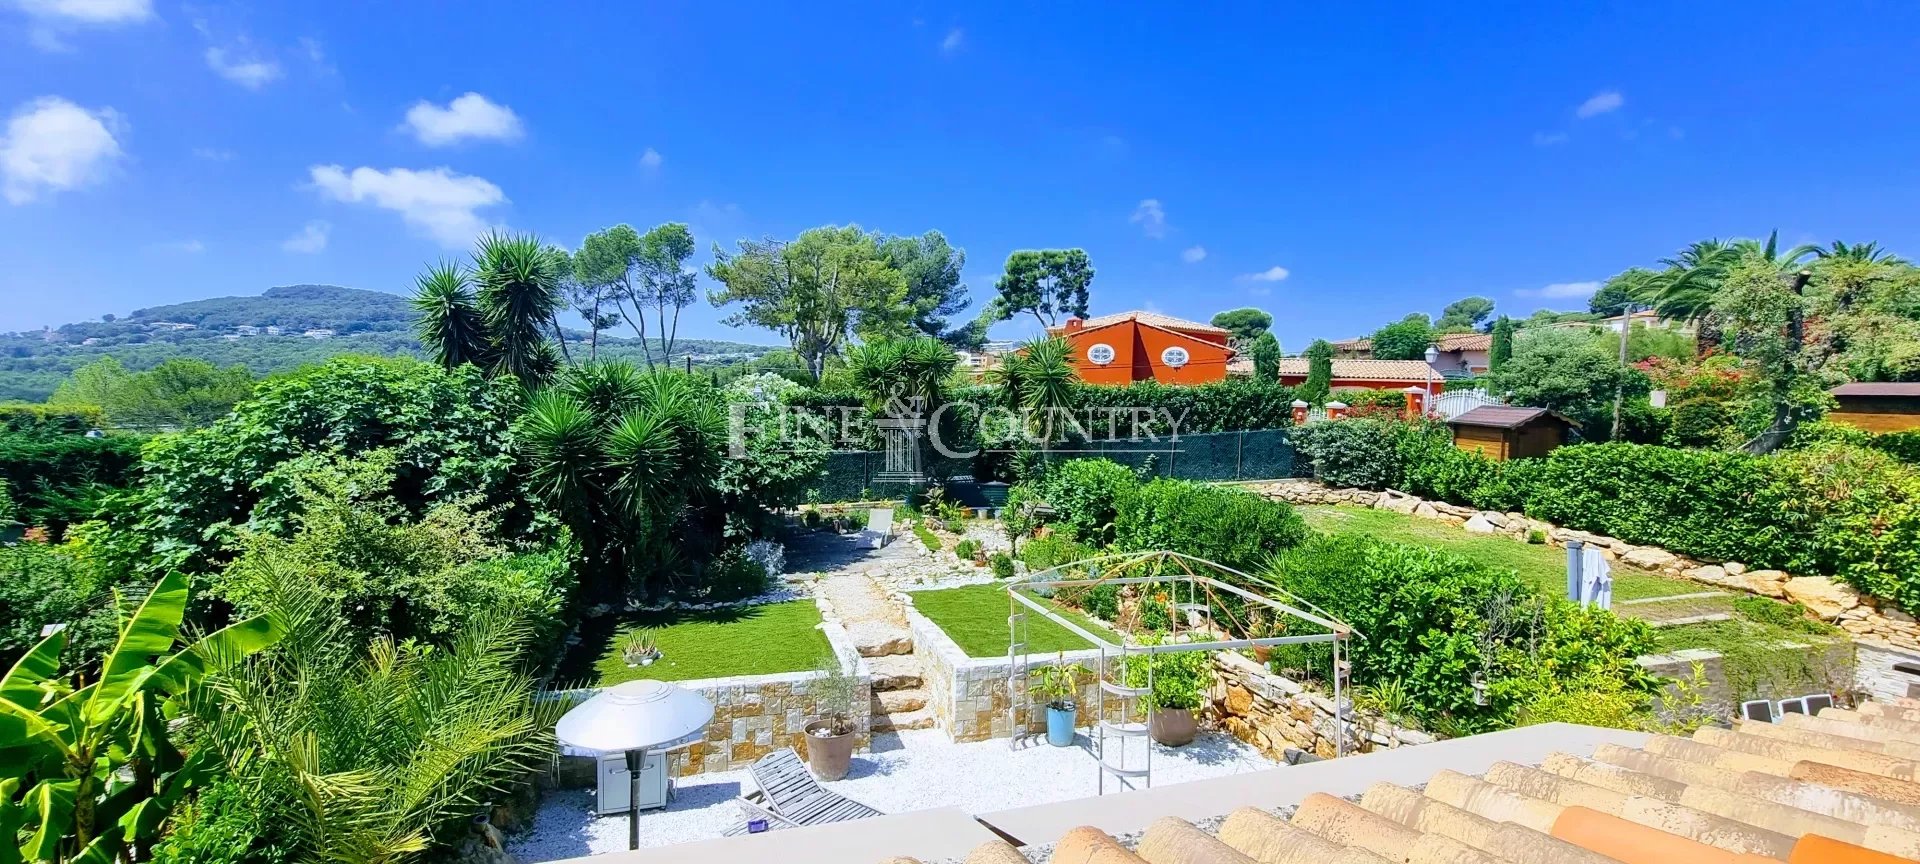 House for sale in Hills of Antibes Accommodation in Cannes